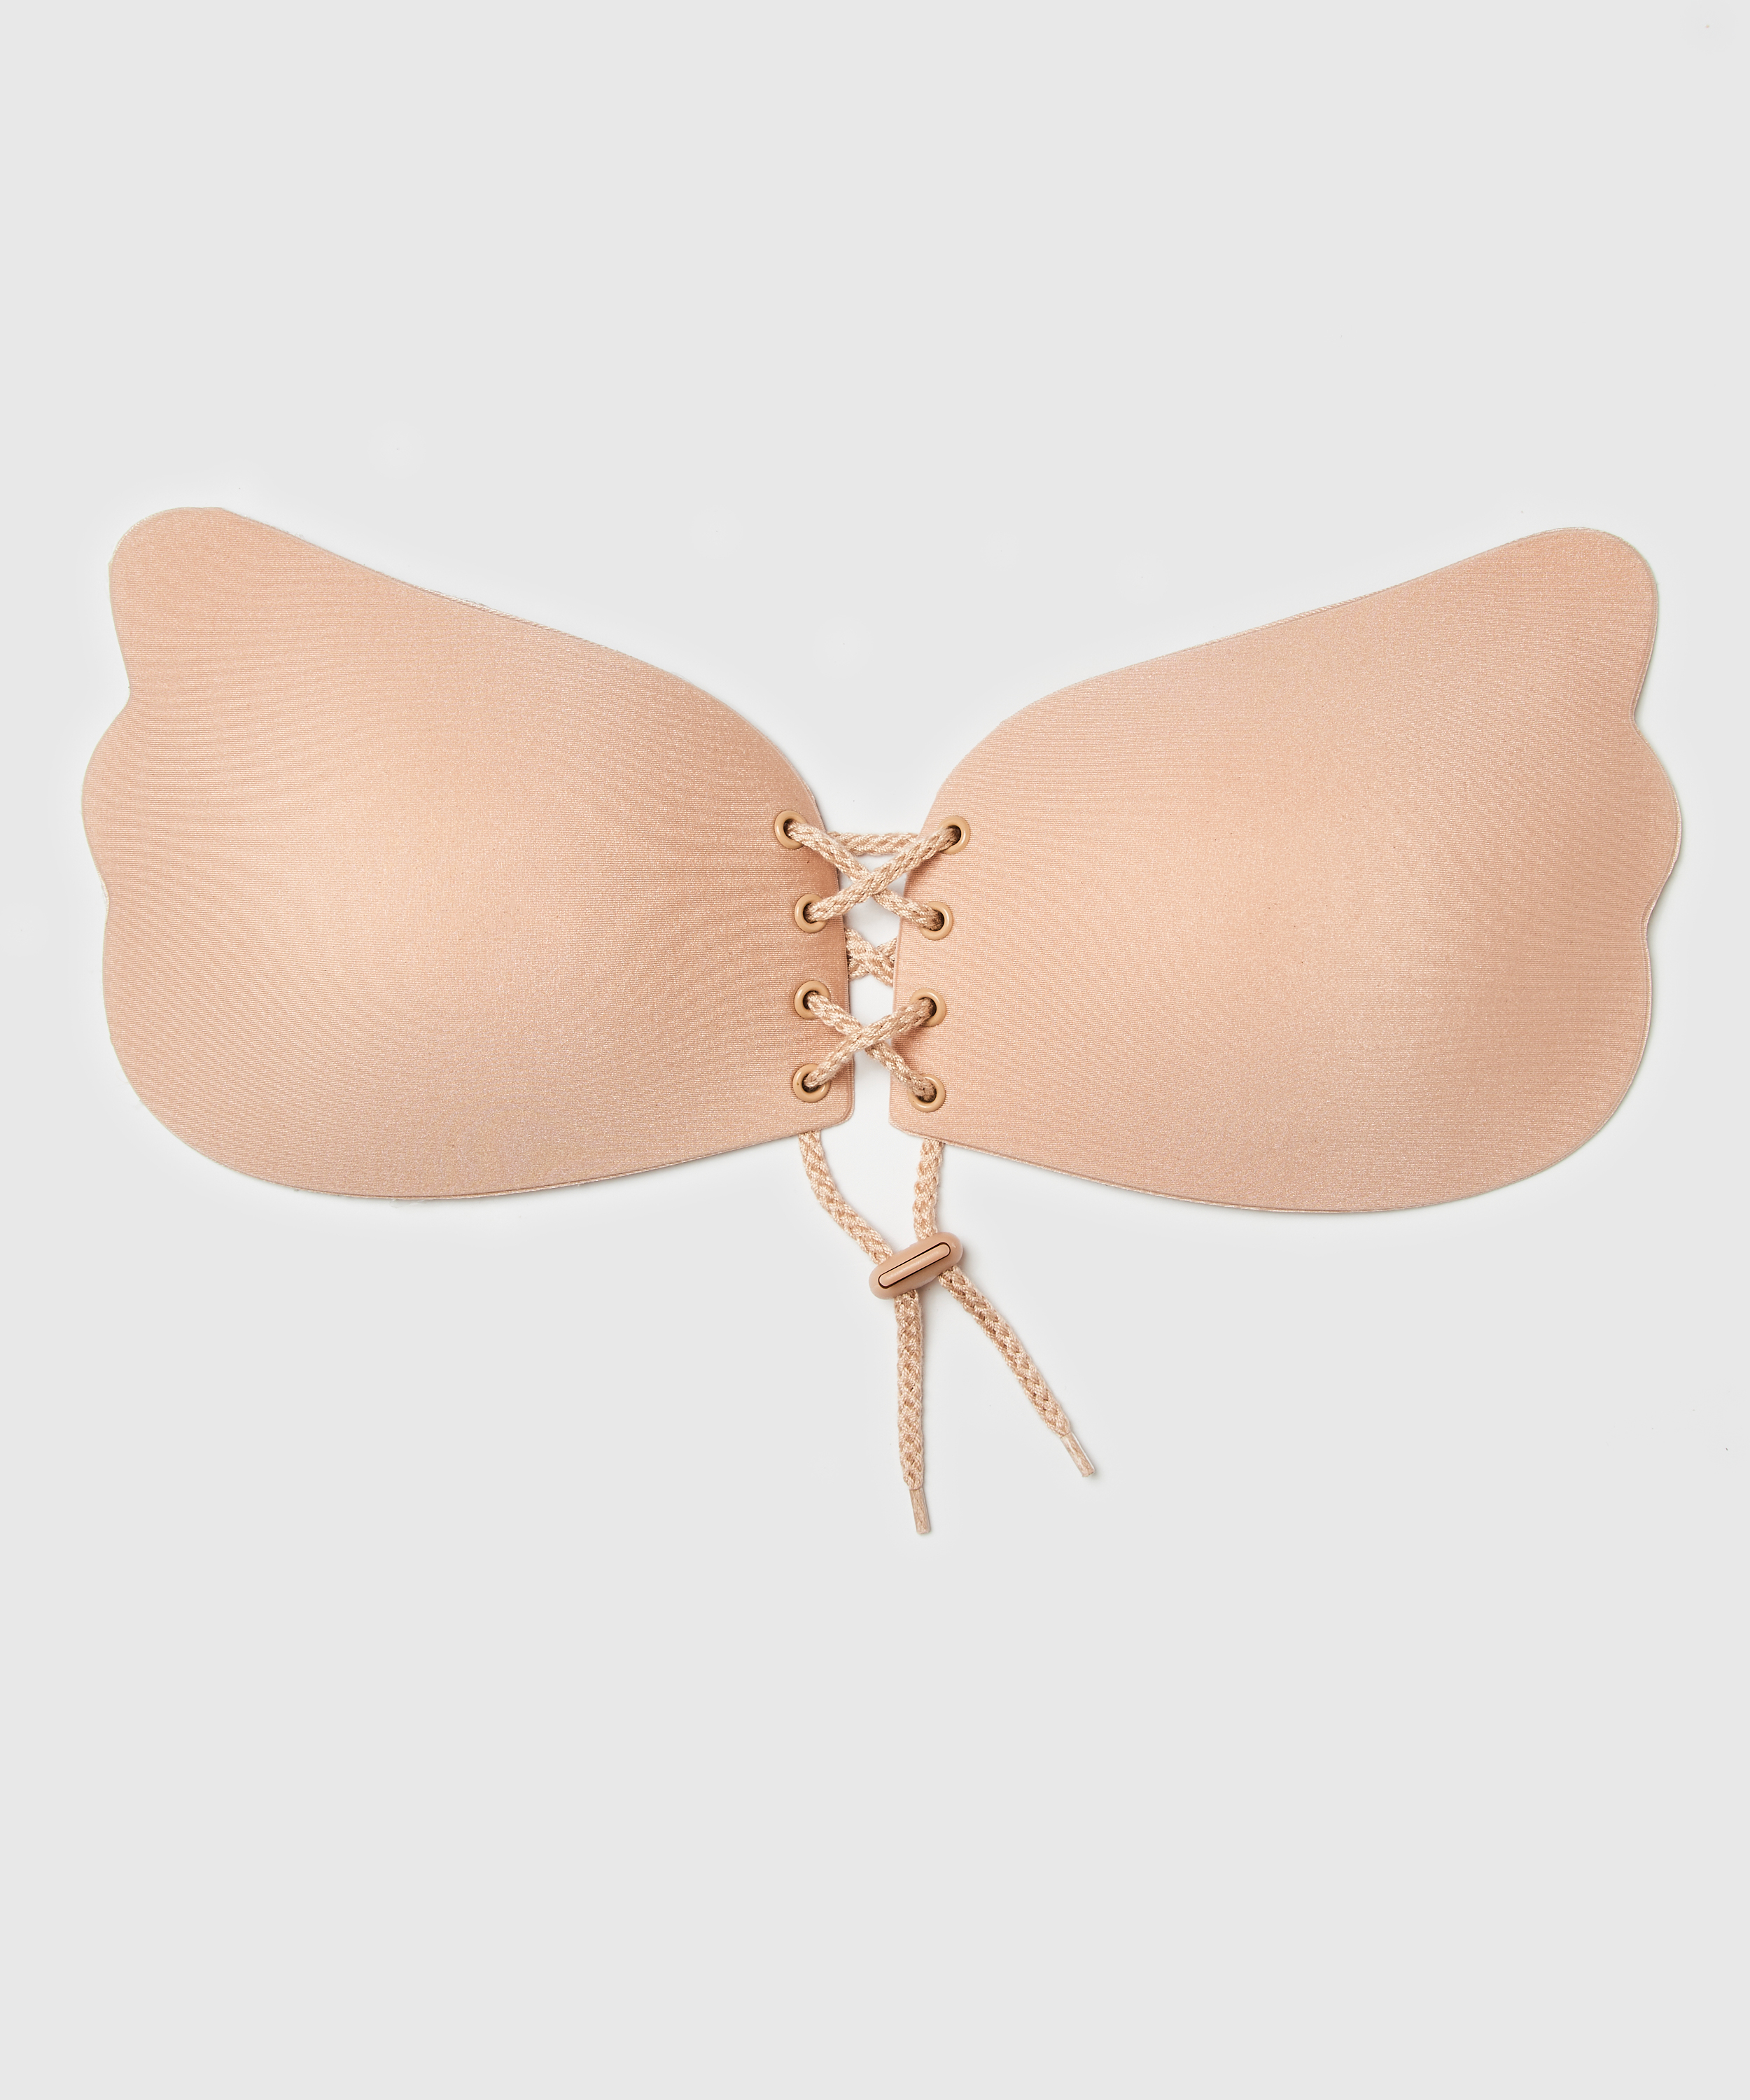 Push-up bra with wing, Beige, main